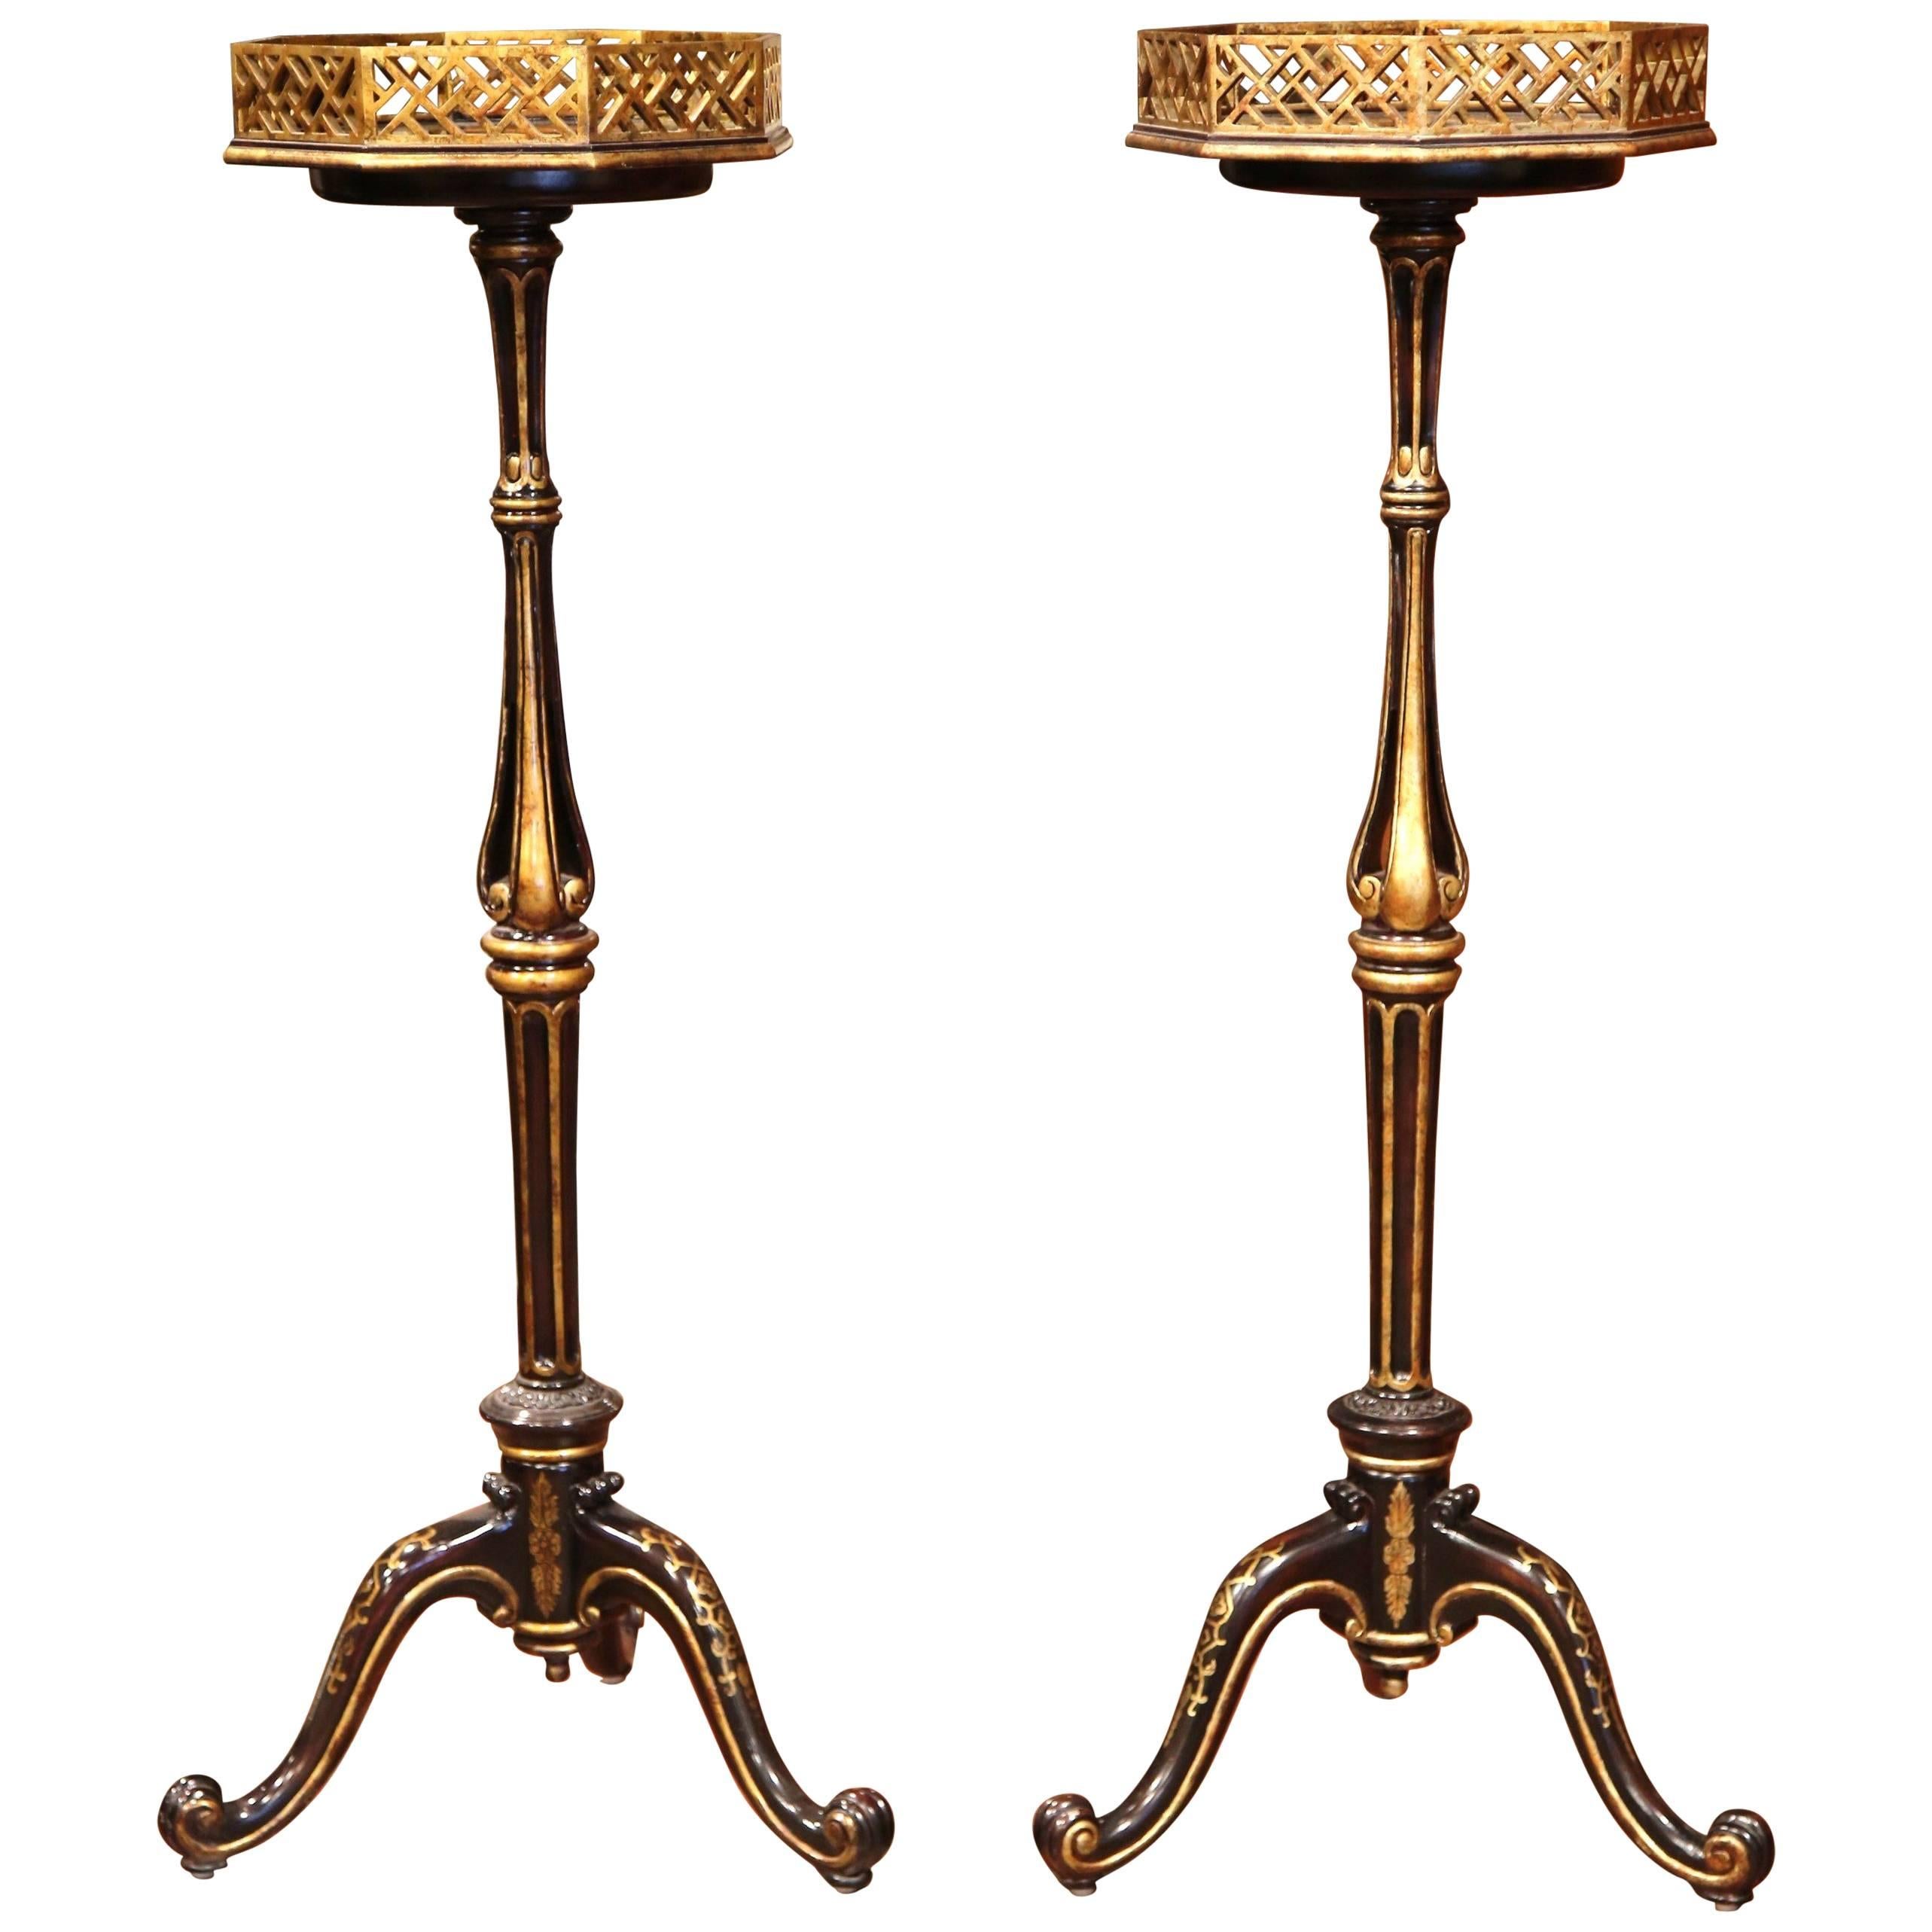 Pair of Tall Mid-20th Century French Painted with Gilt Pedestal Plant Stands